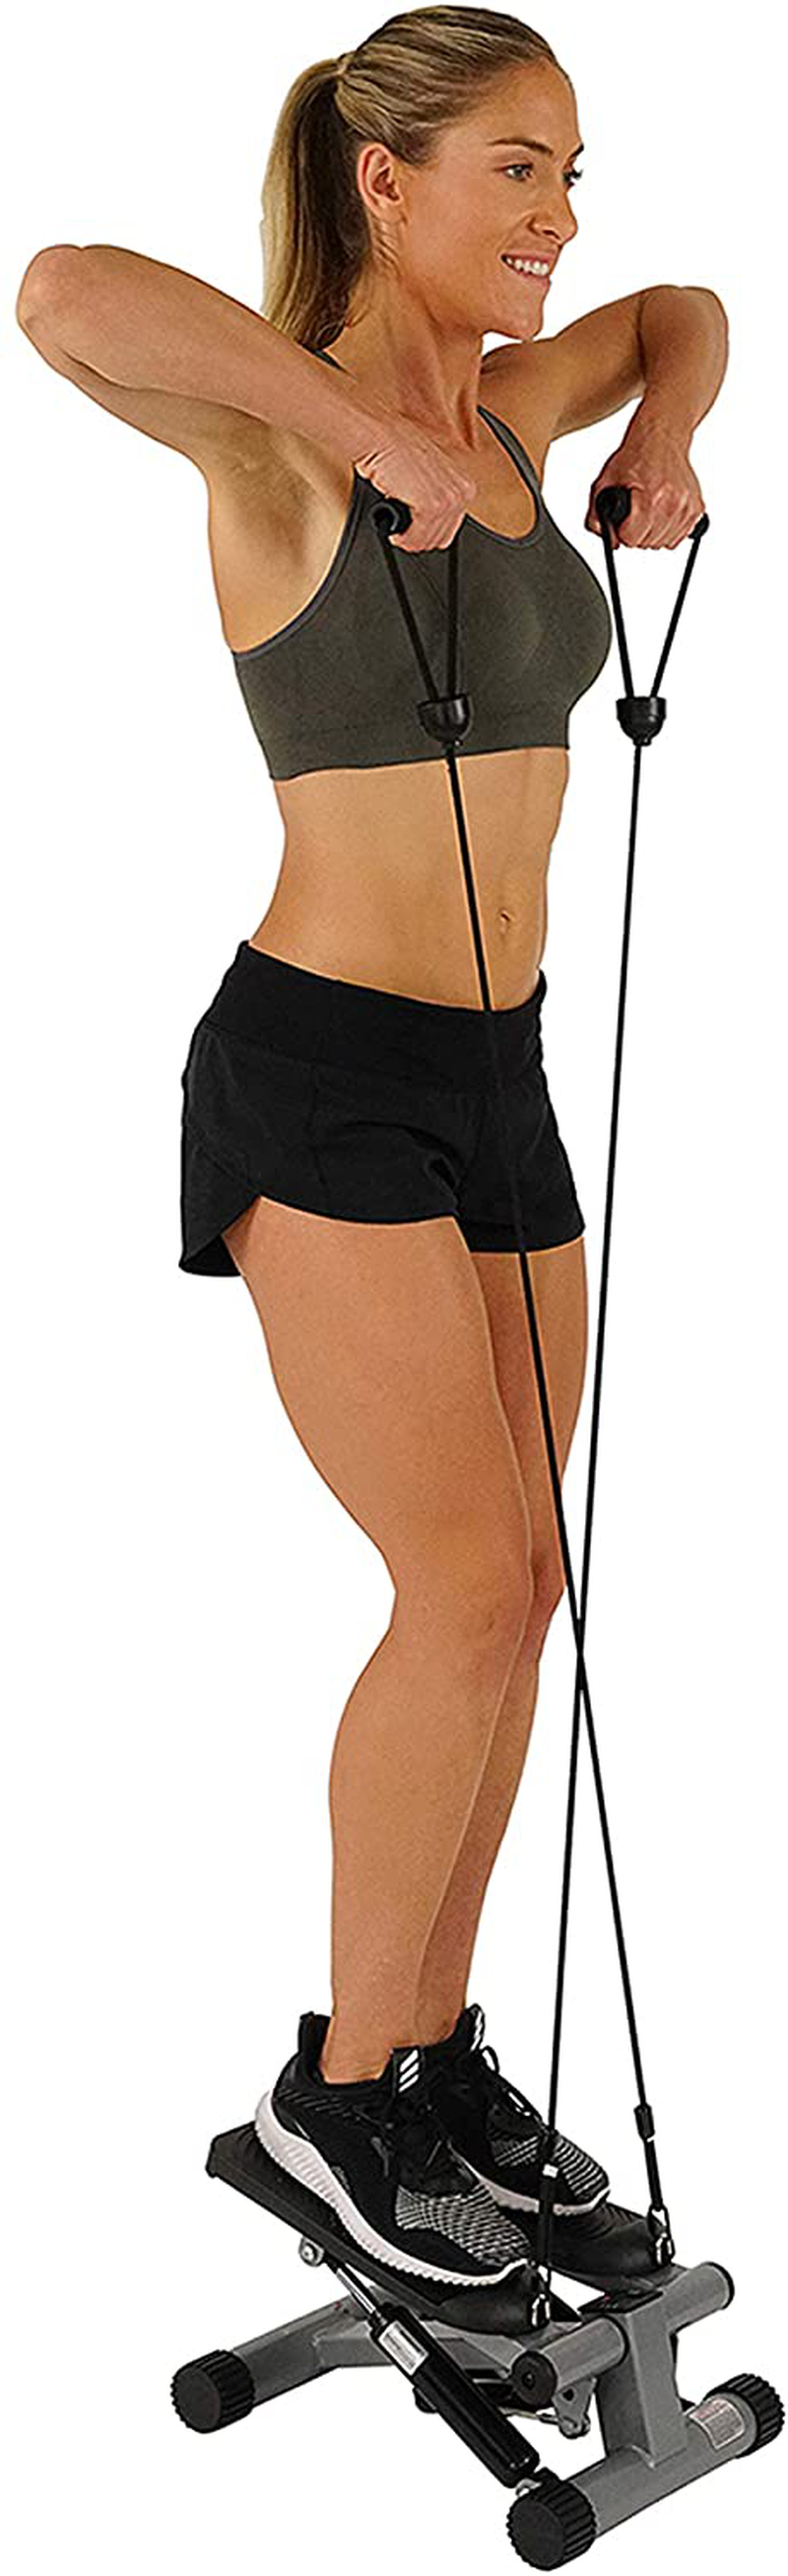 Sunny Health & Fitness Mini Stepper with Resistance Bands  Sunny Health & Fitness   